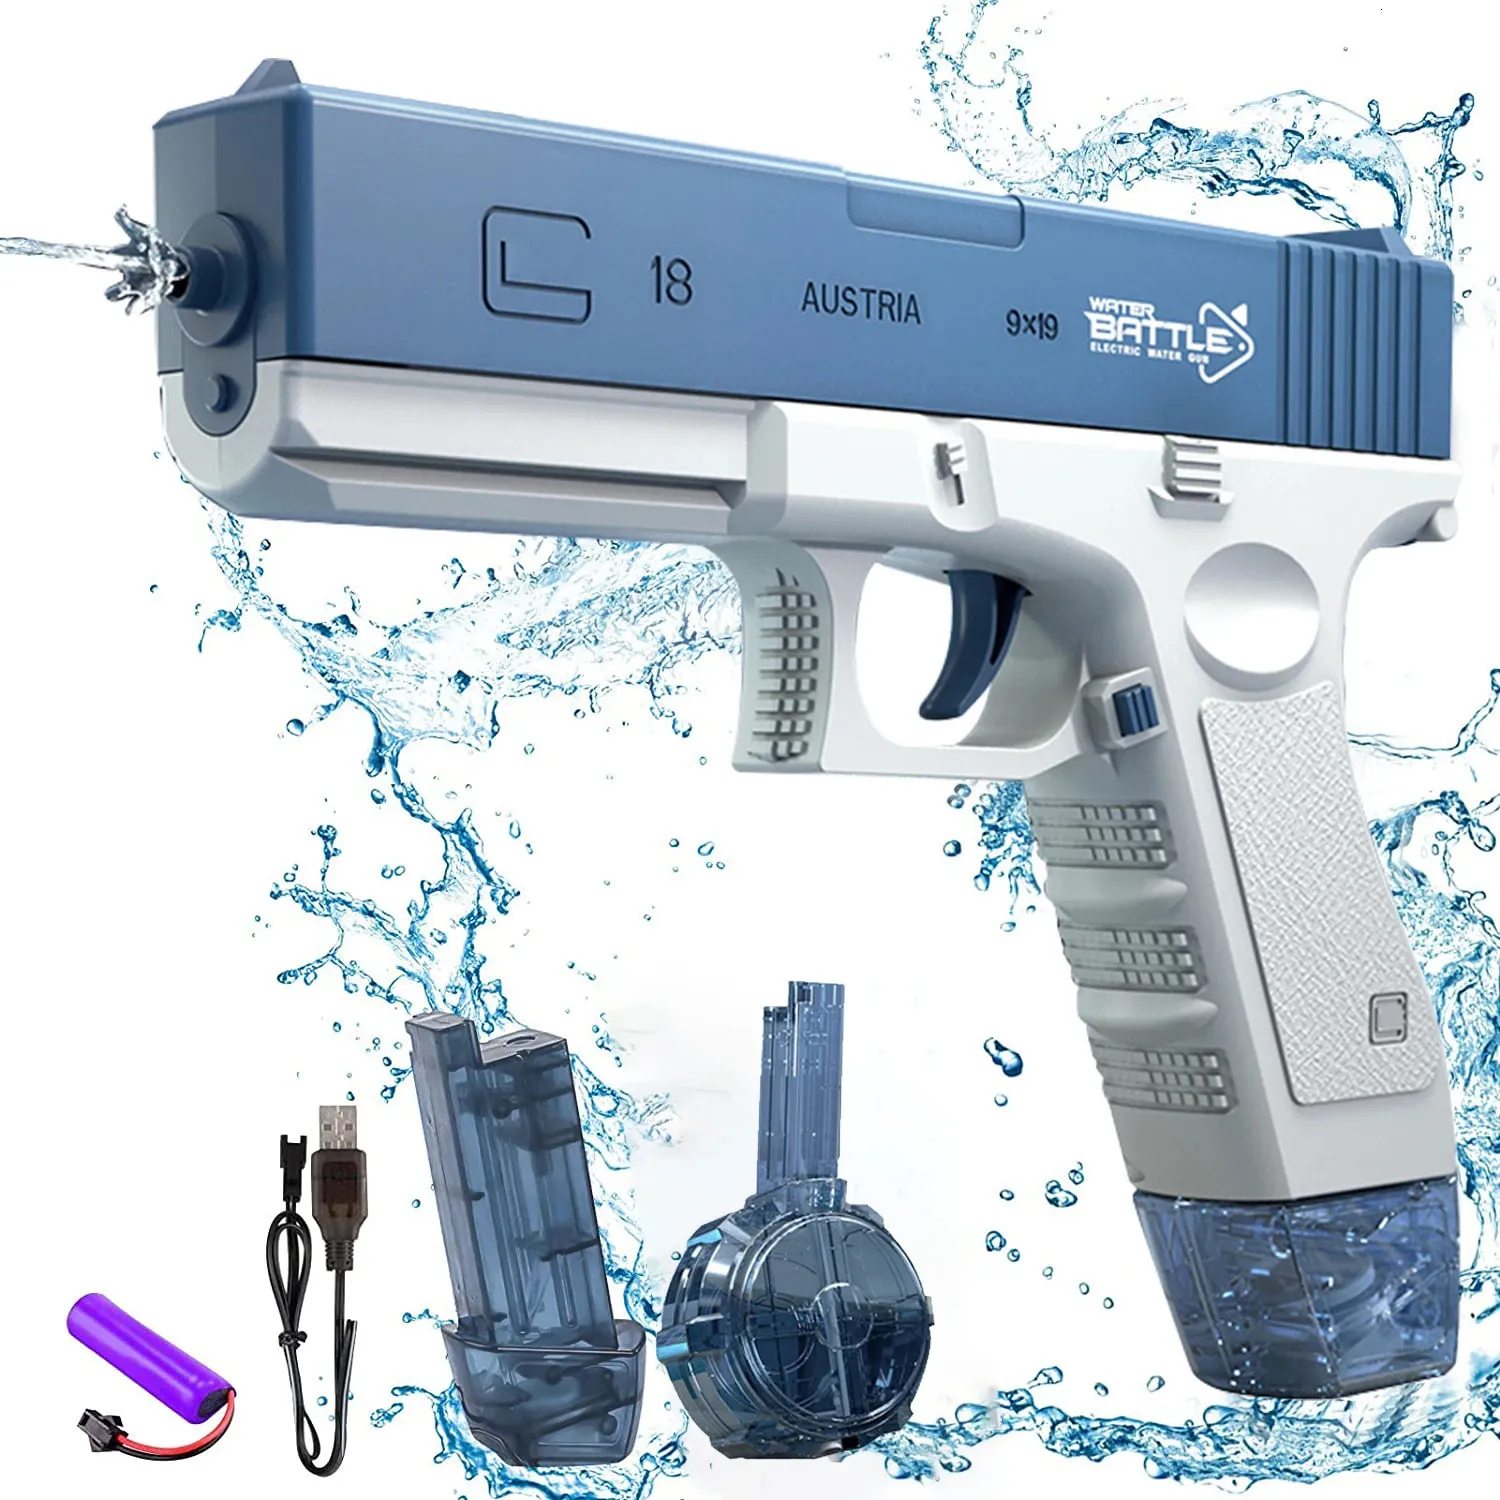 Electric Water Storage Gun Pistol Shooting Toy Portable Children Summer Beach Outdoor Fight Fantasy Toys for Boys Kids Game 240409